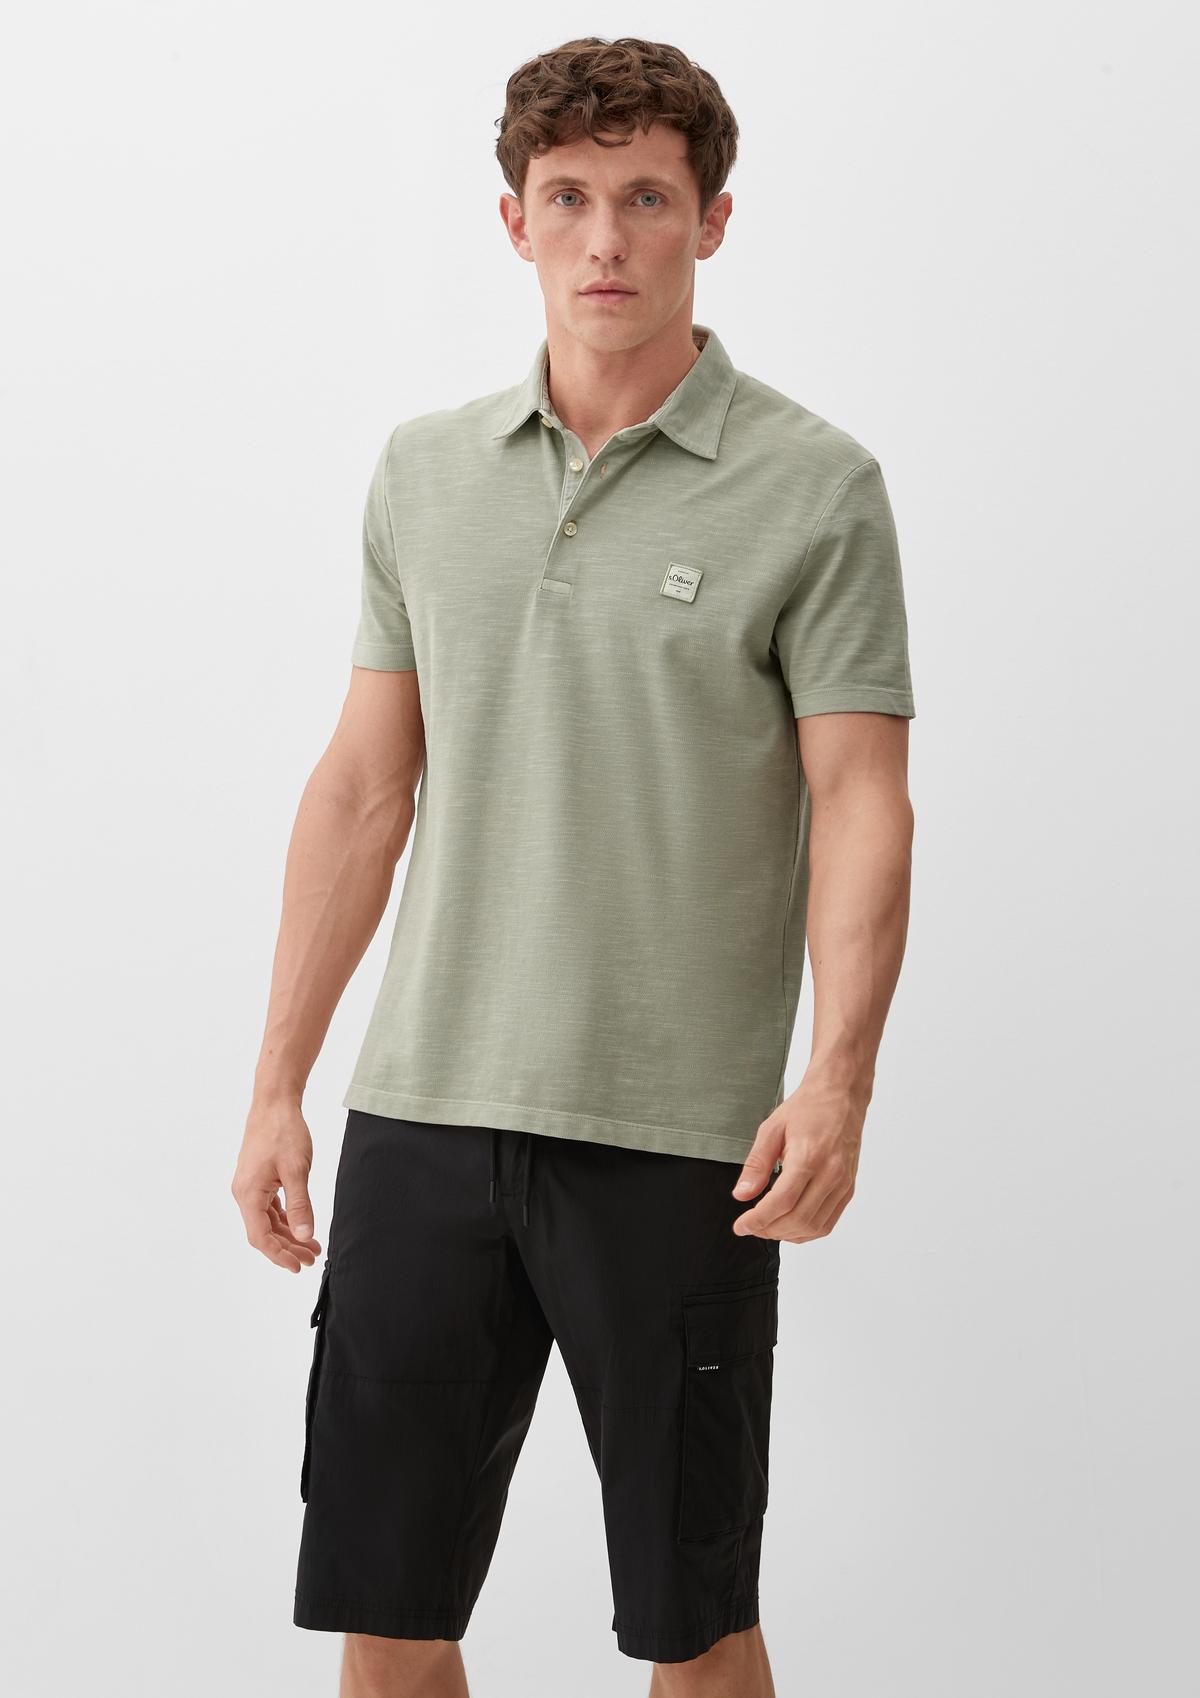 s.Oliver Relaxed fit: Shorts with a drawstring panel